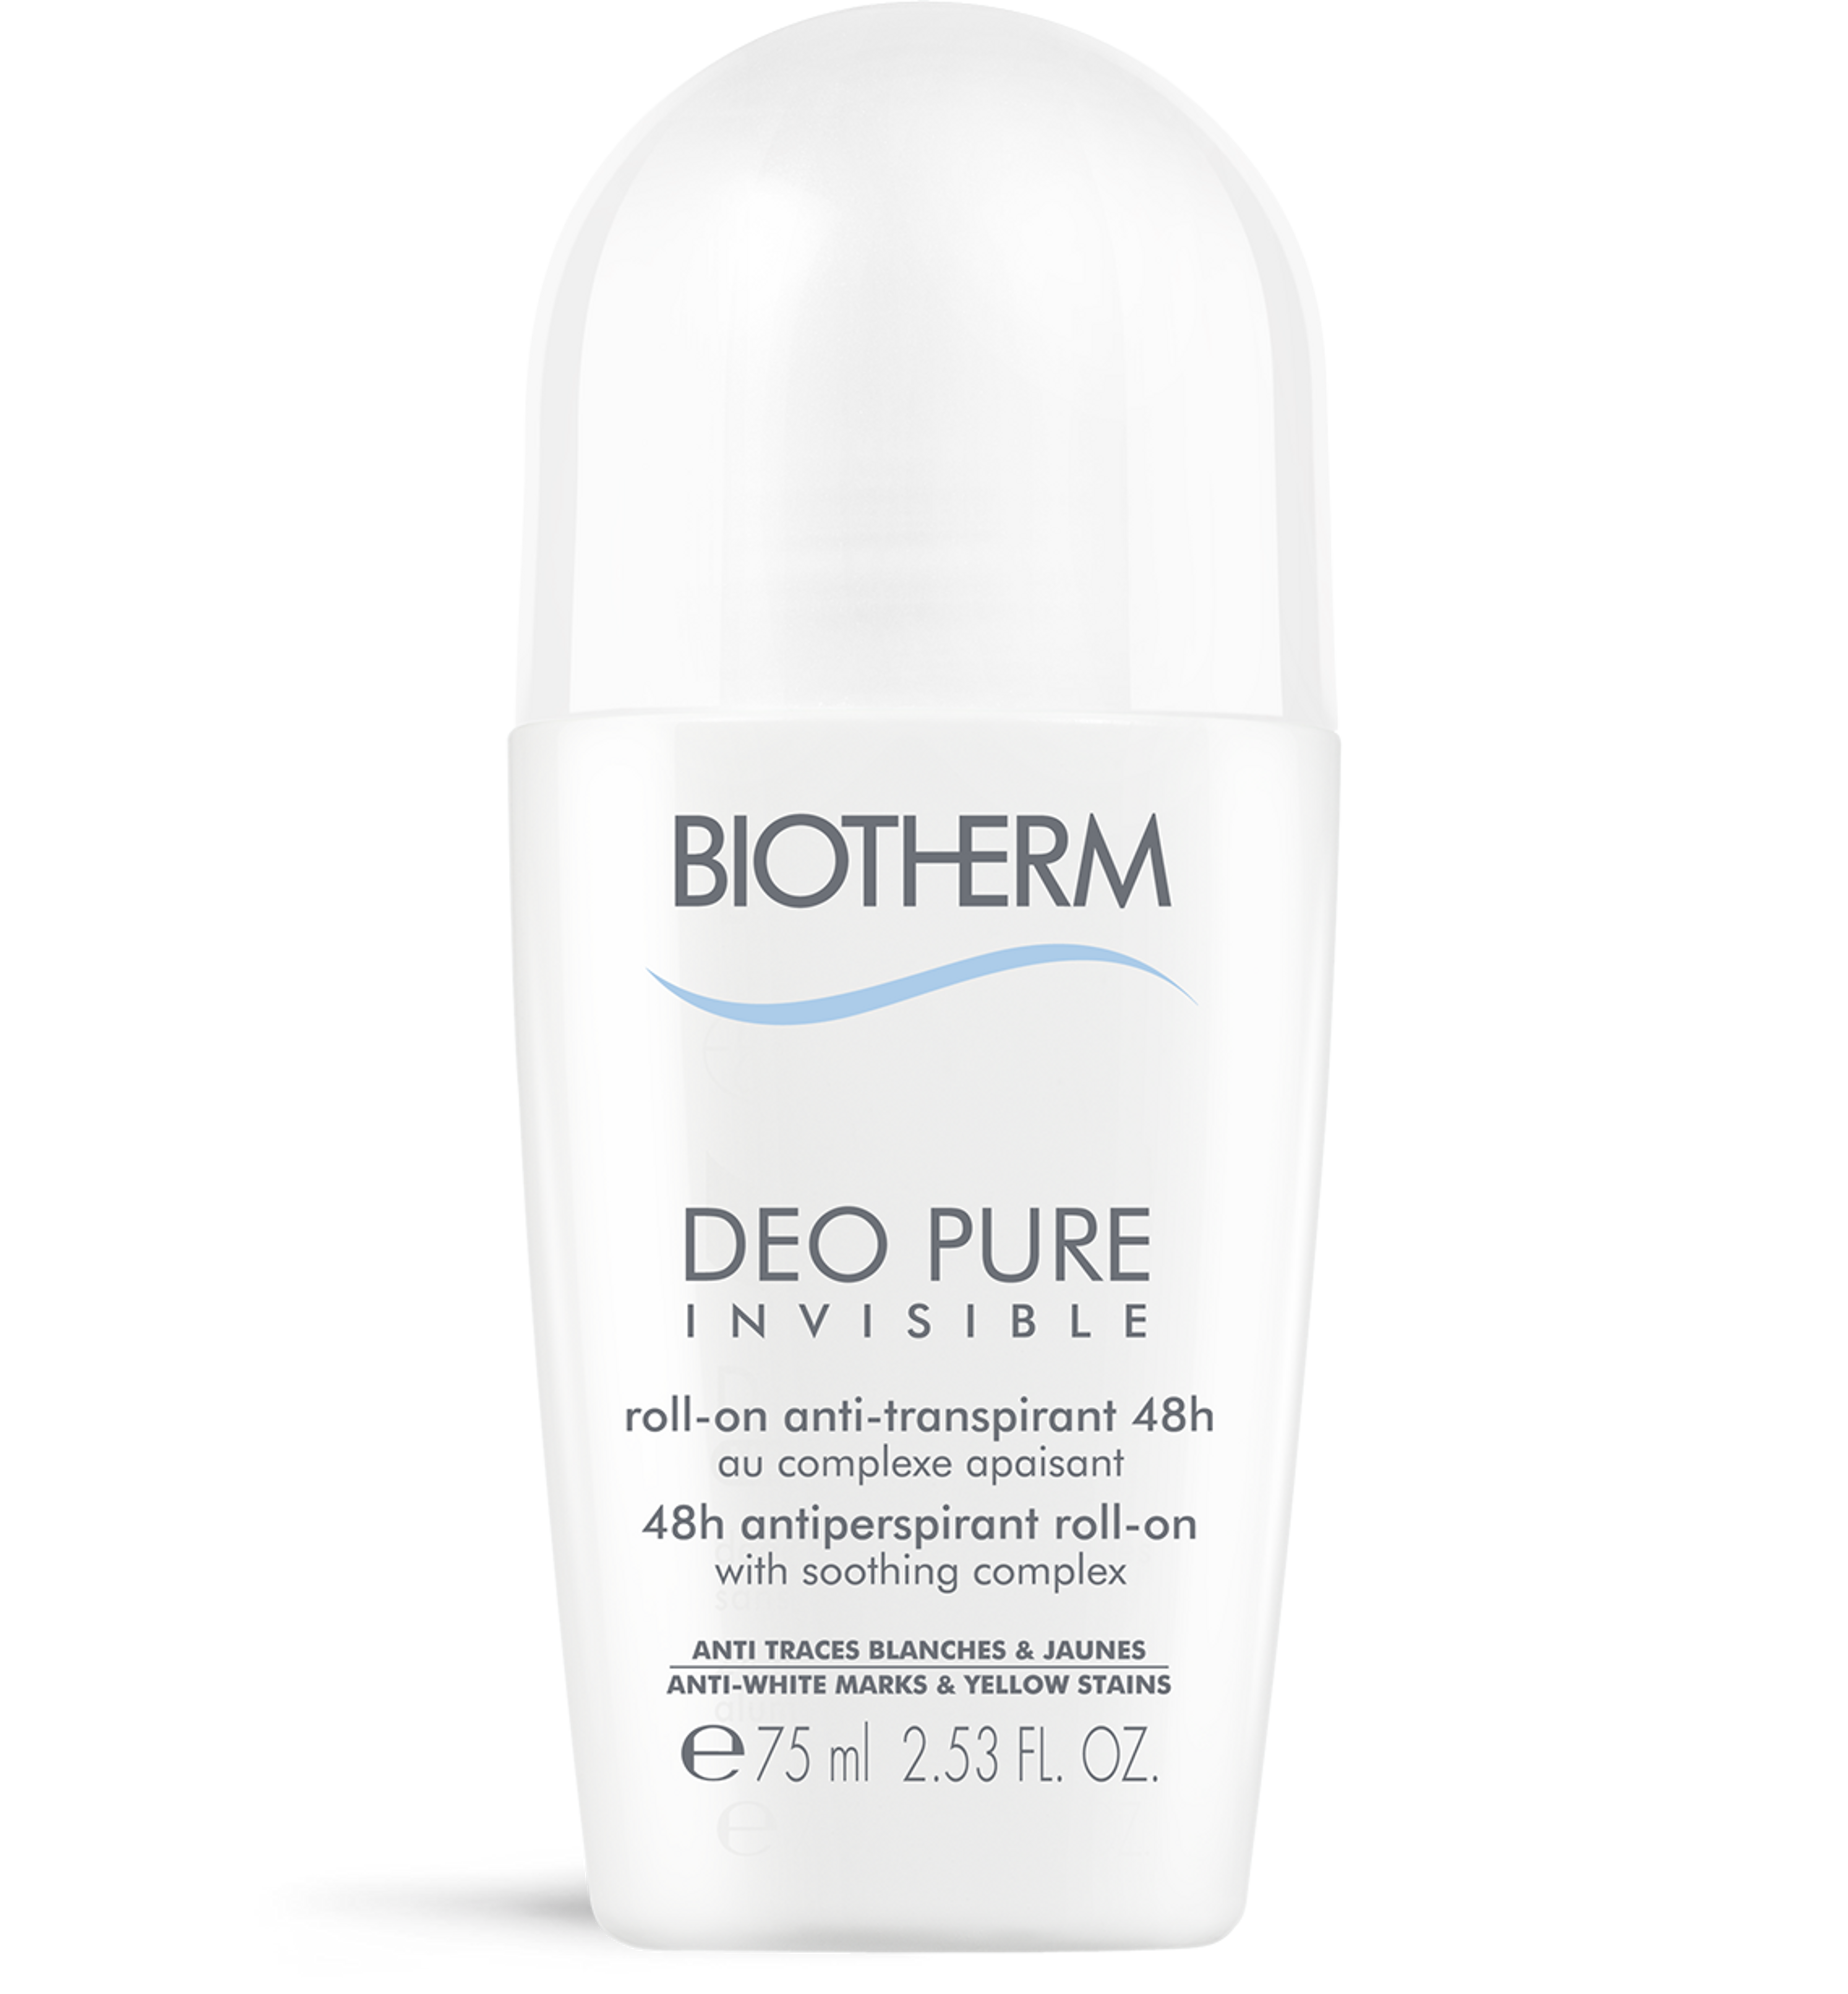 Biotherm Deo Pure Invisible 48h 1